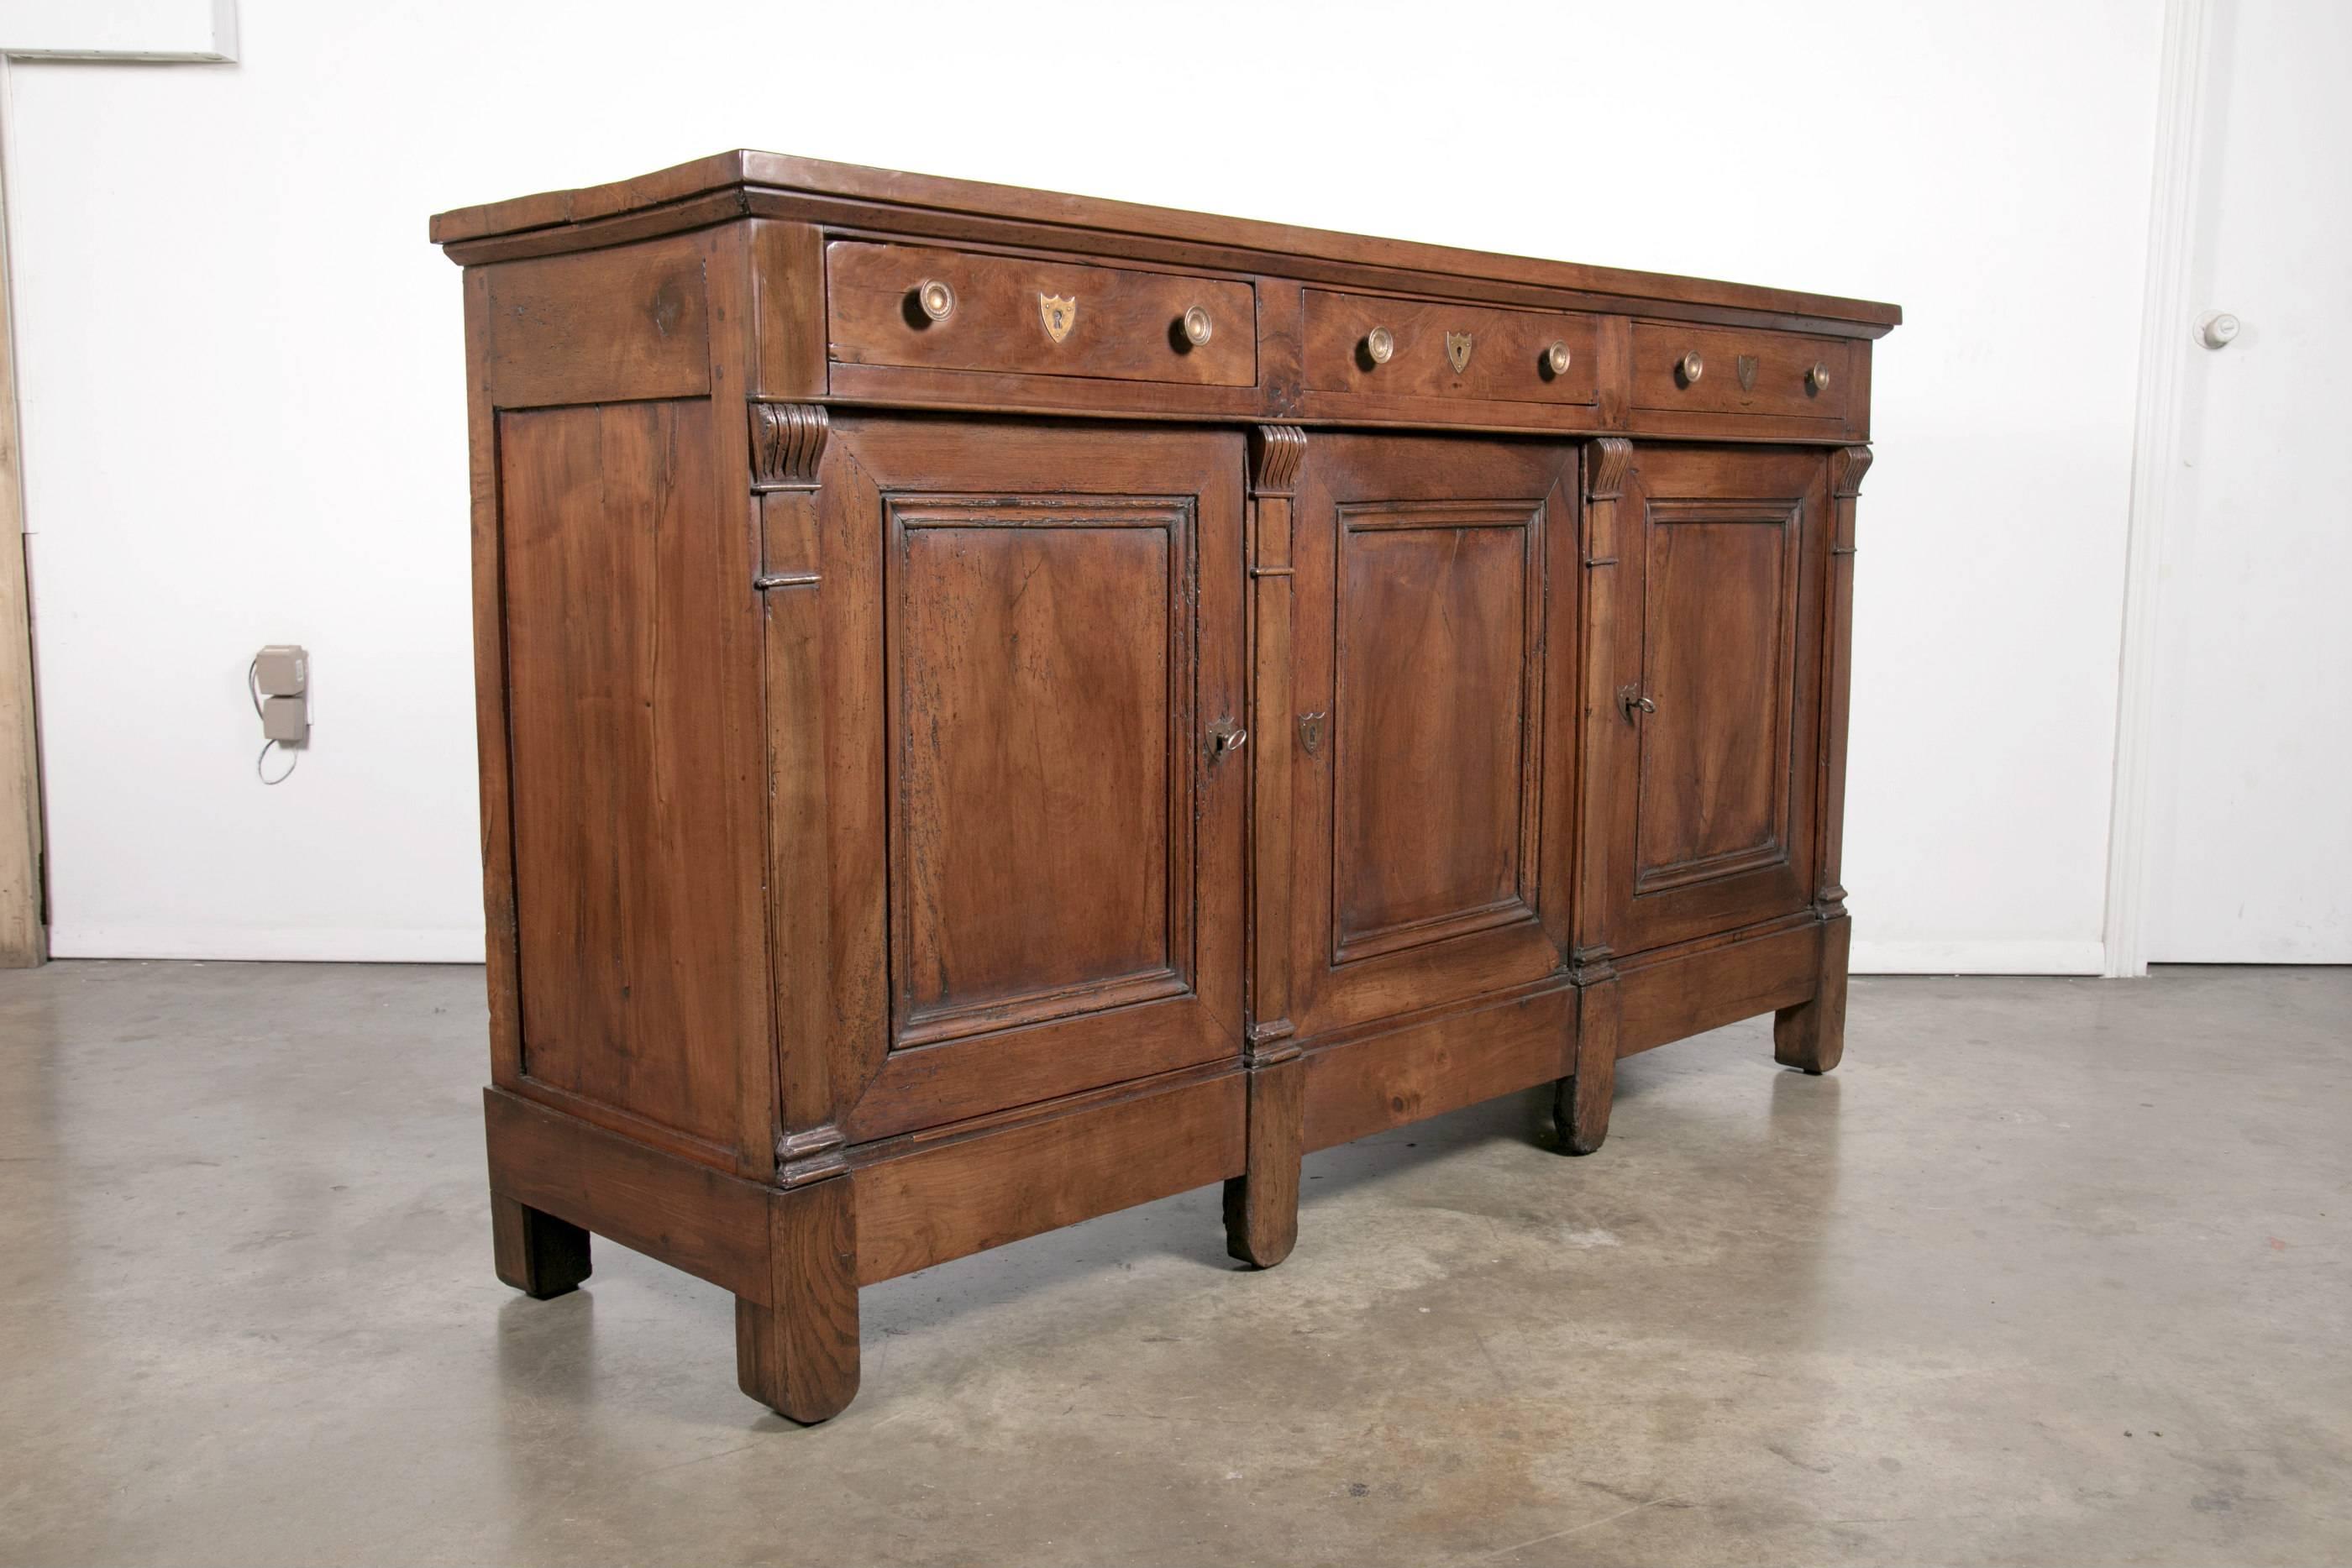 Antique French solid walnut Directoire period enfilade buffet handcrafted by talented artisans from Lyon. Paneled top above three drawers and three paneled doors divided by pilaster columns with original bronze hardware. Spacious interior storage.